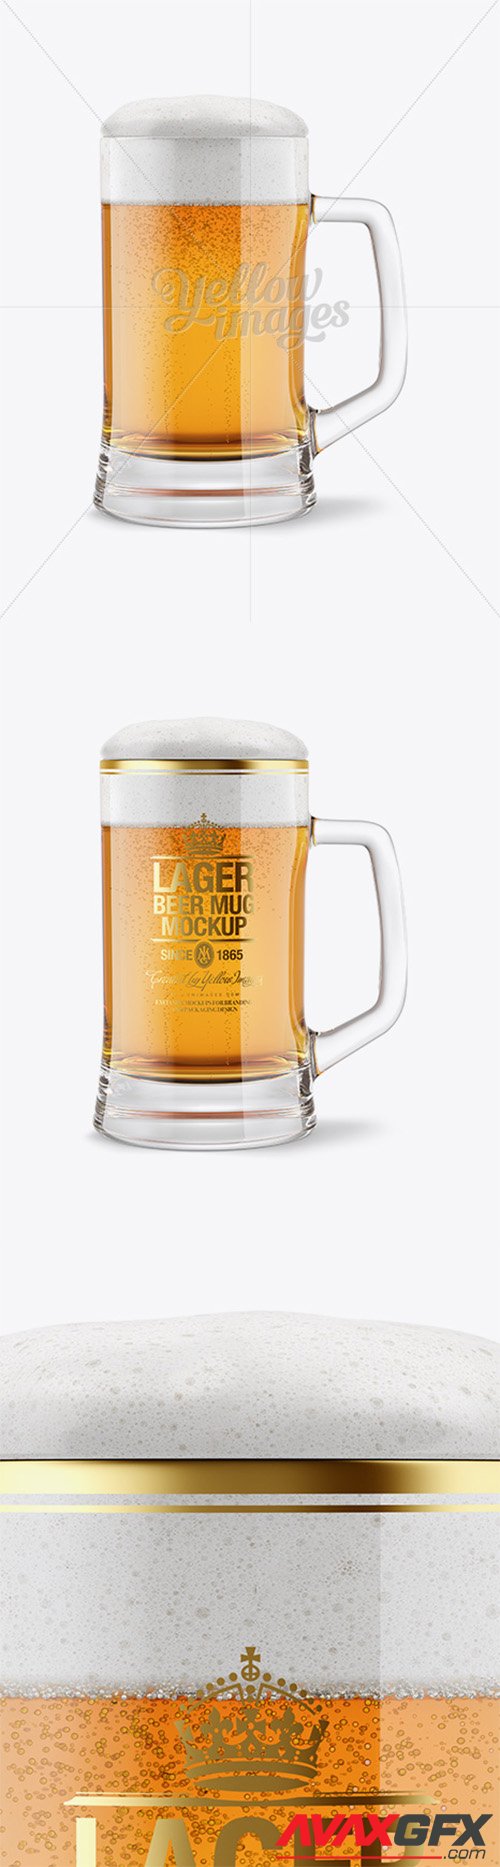 Download Tankard Glass Mug With Lager Beer Mockup 14664 Avaxgfx All Downloads That You Need In One Place Graphic From Nitroflare Rapidgator PSD Mockup Templates